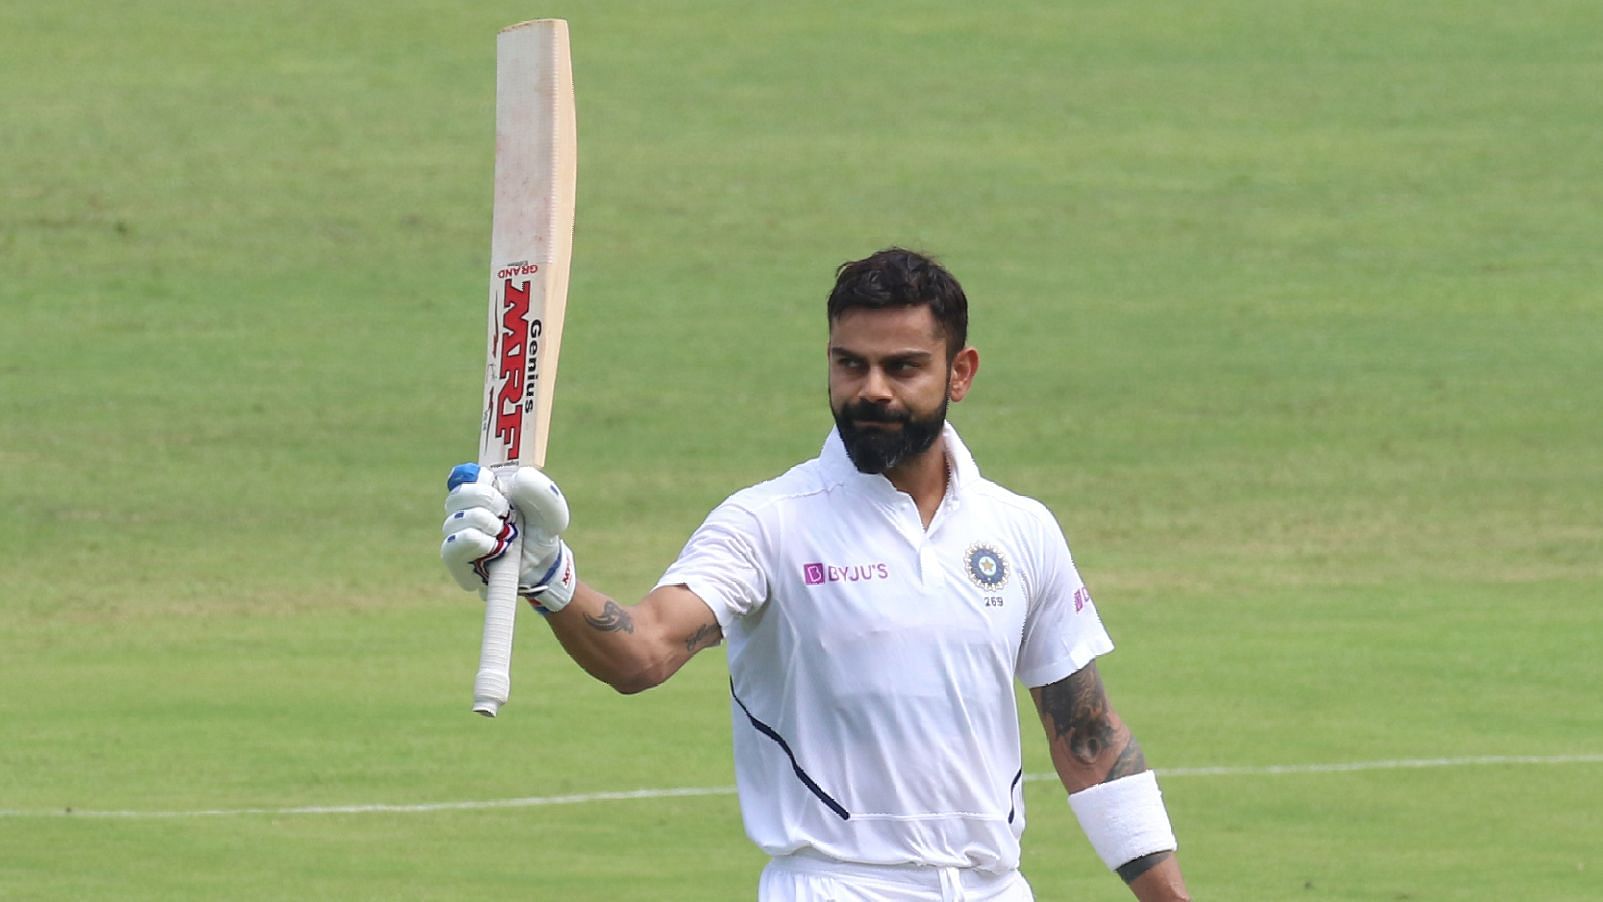 India captain Virat Kohli scored his 26th Test century and his first this year on the second day of the second Test against South Africa.